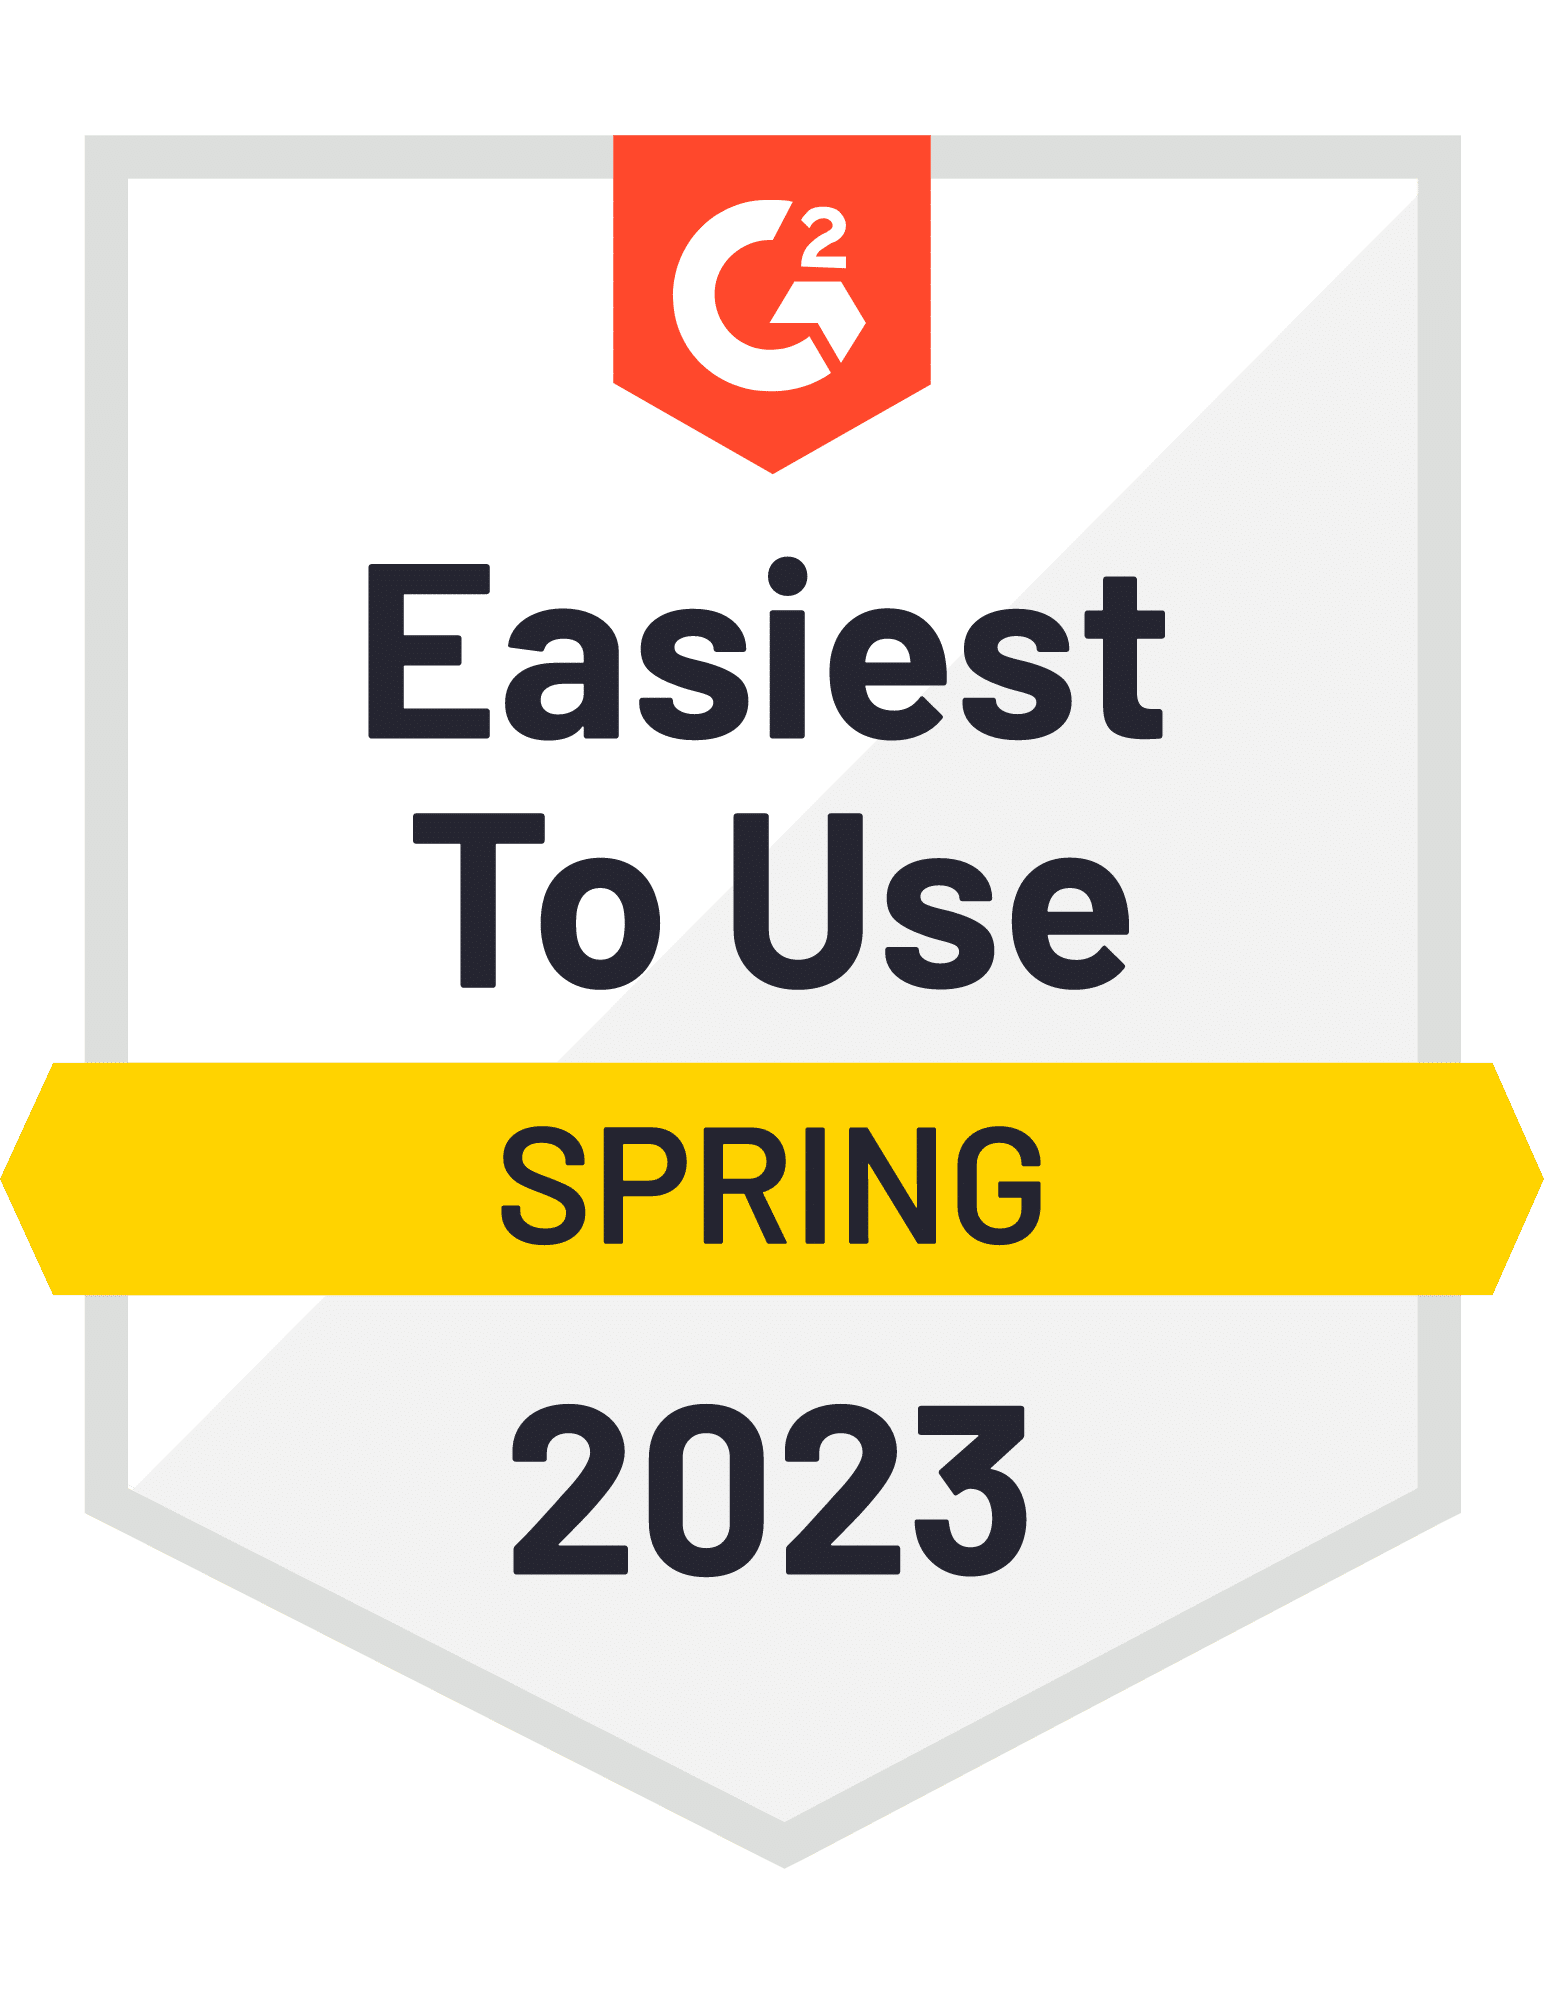 Easiest to Use Spring 2023 G2 Award